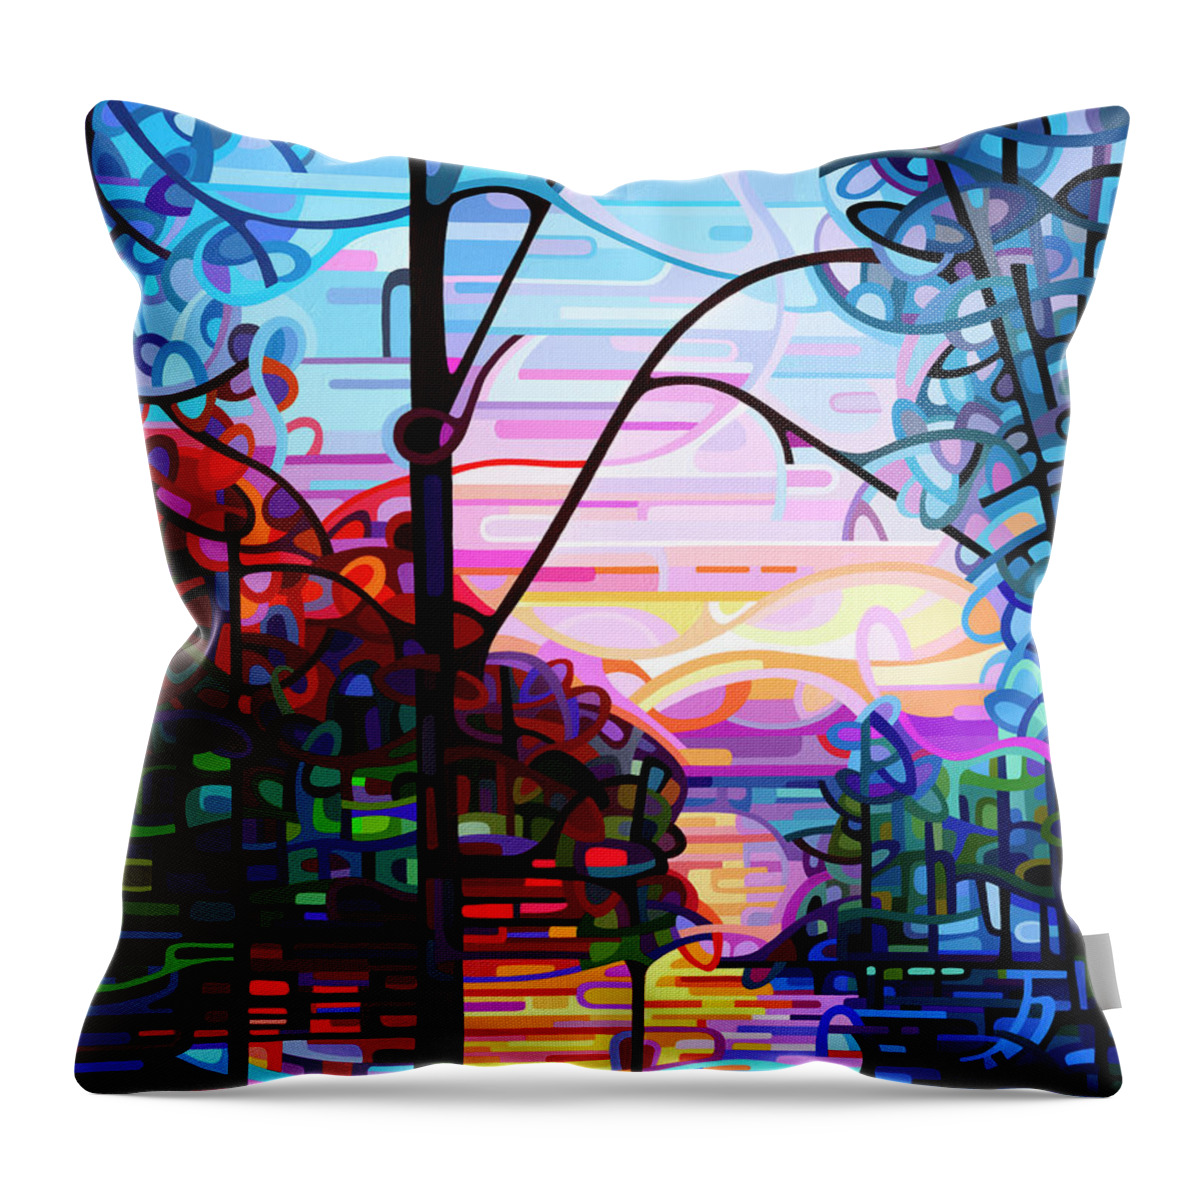 Landscape Throw Pillow featuring the painting Awakening by Mandy Budan